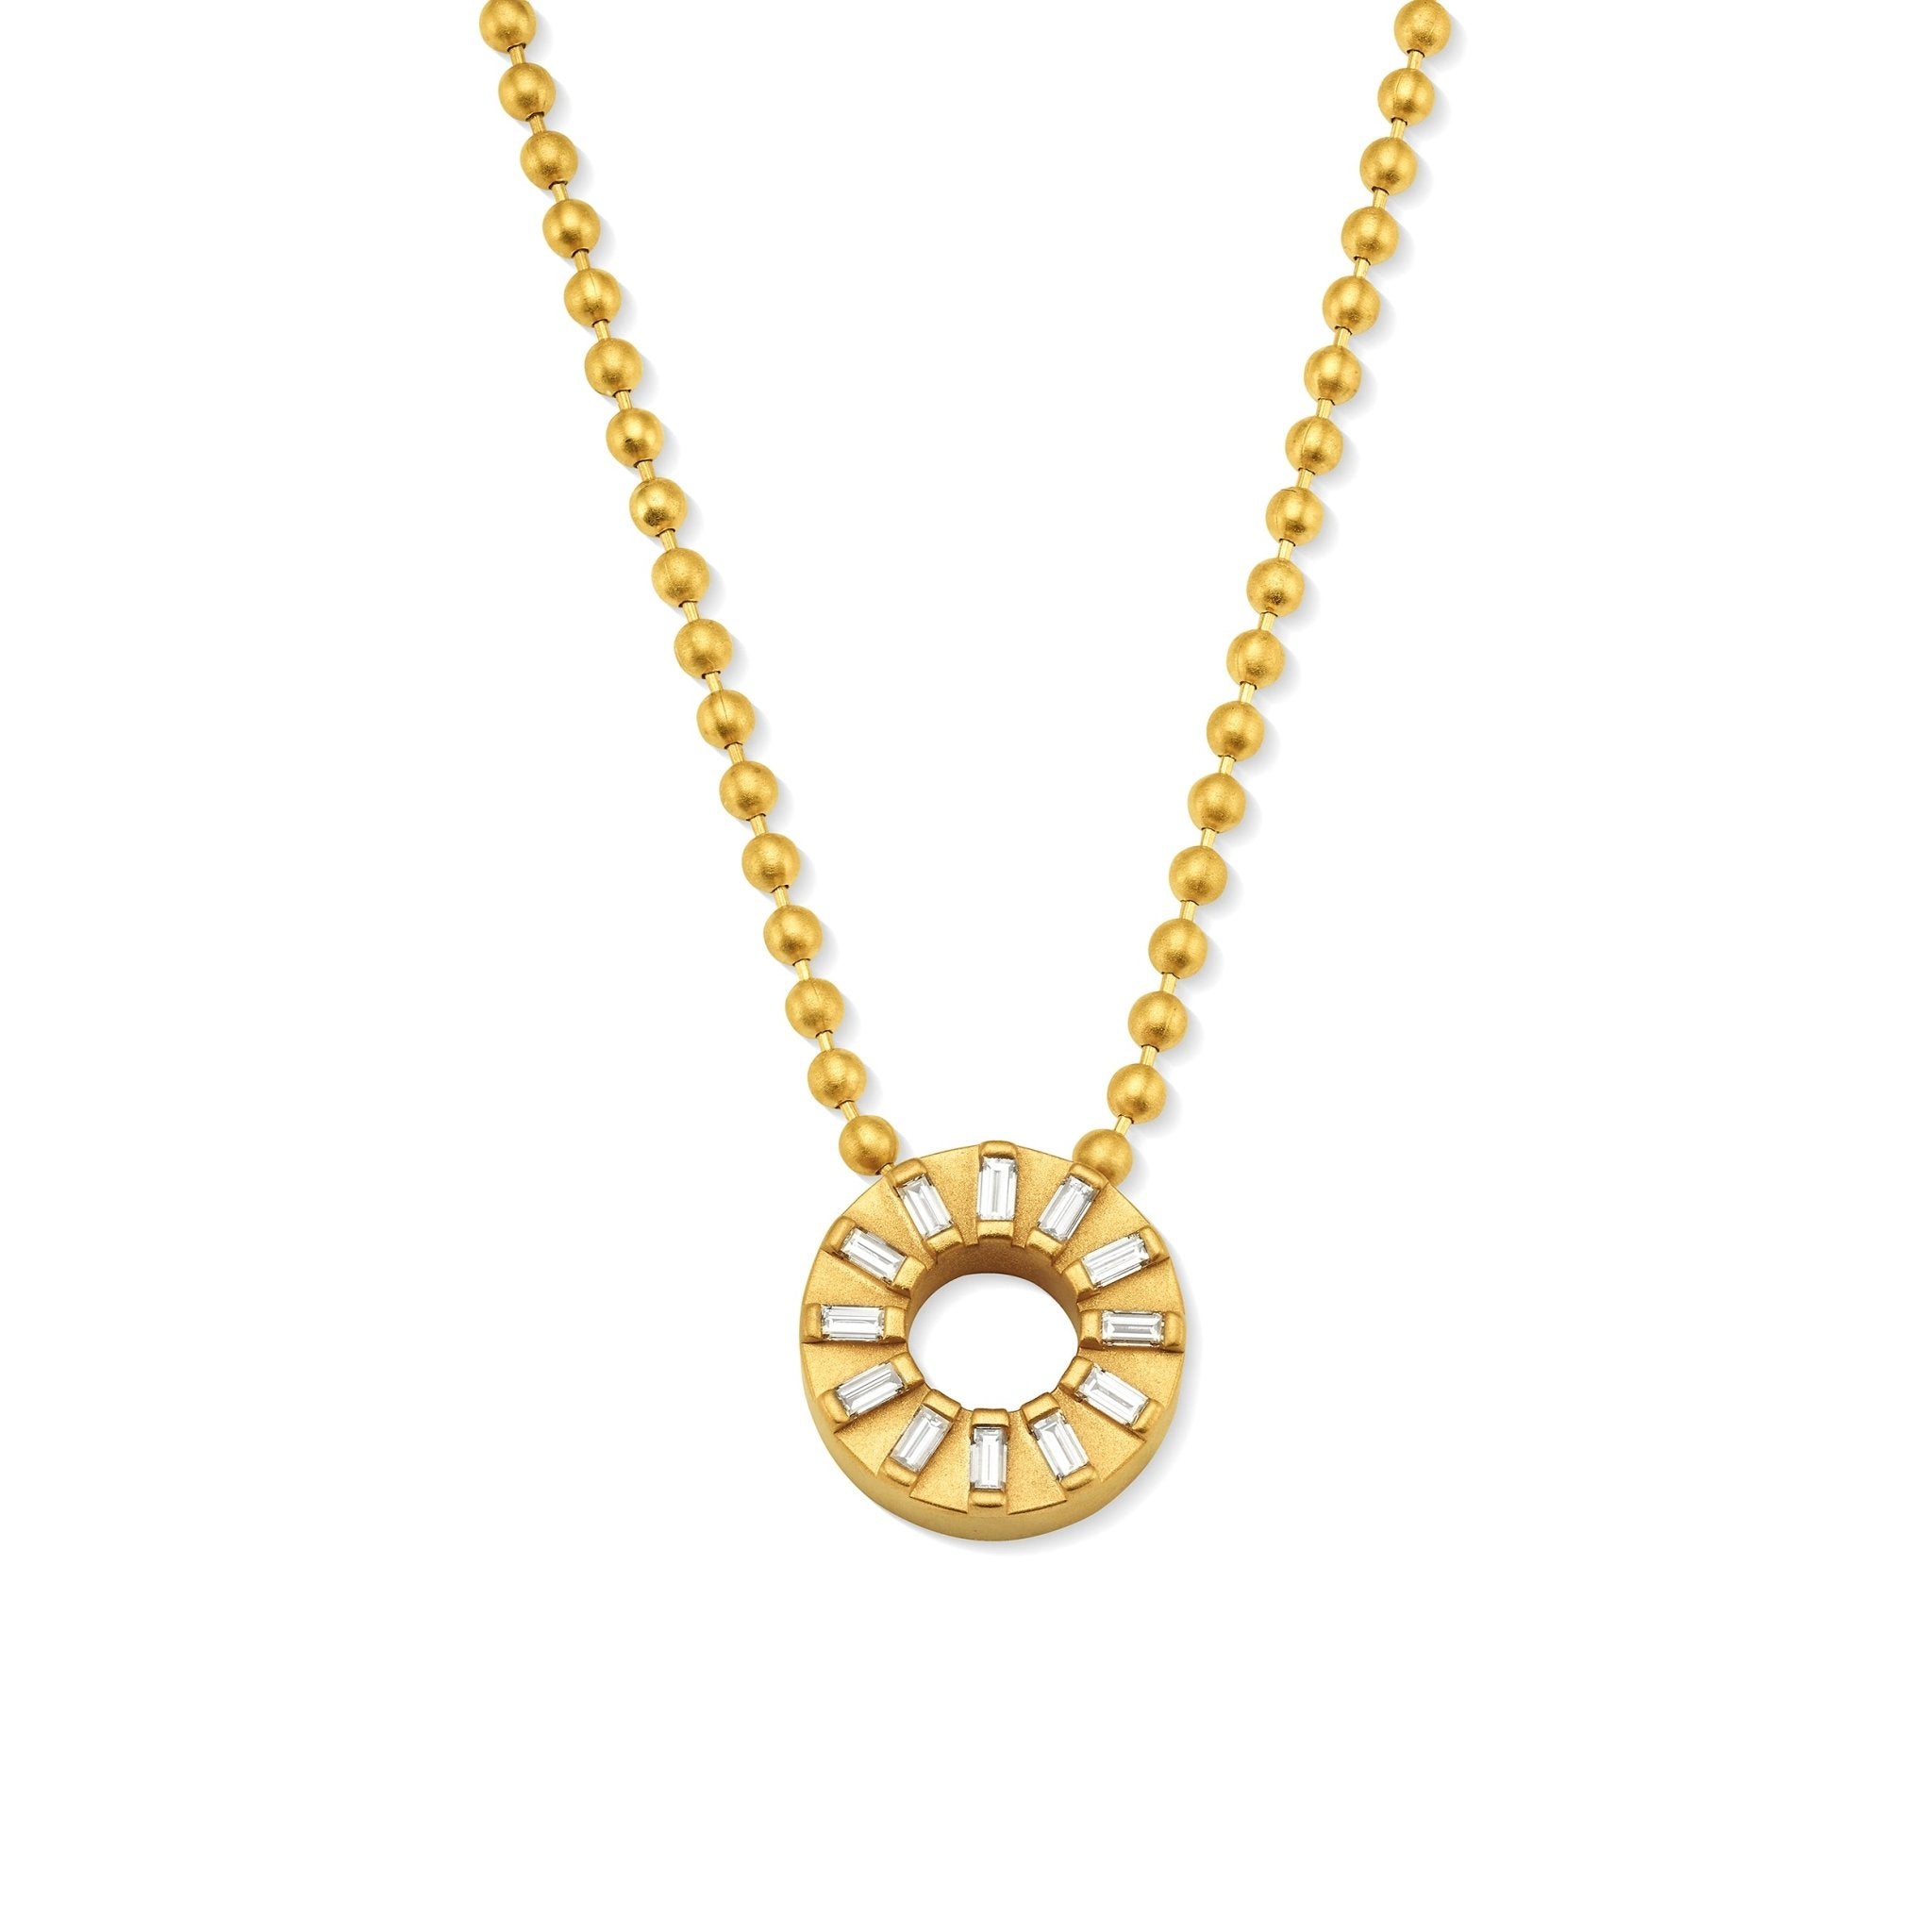 18kt yellow gold Psyche long necklace